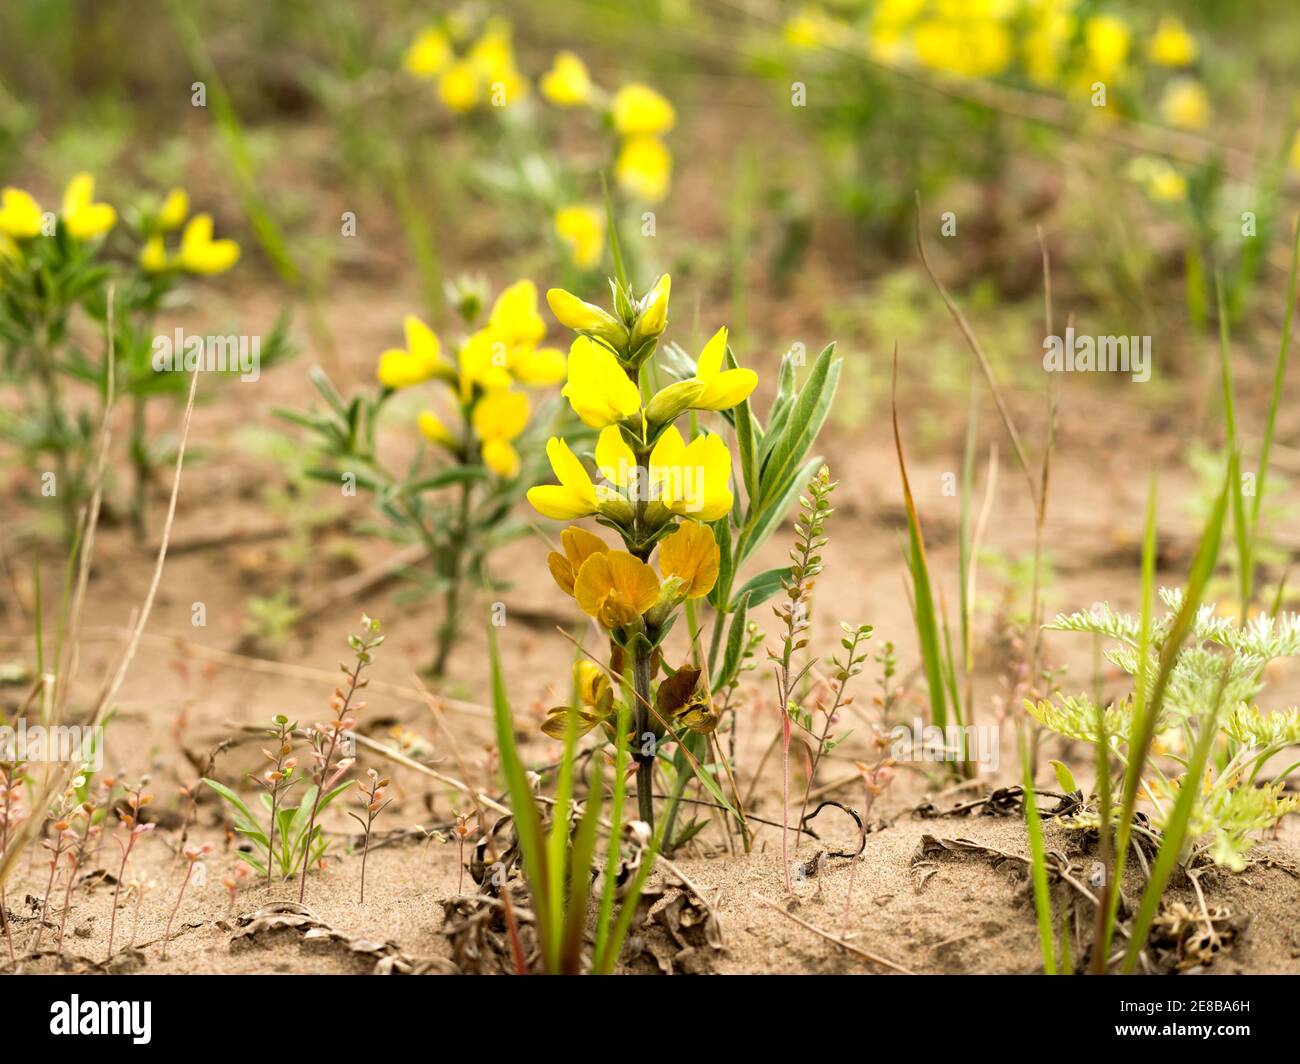 Astragalus saralinsky (lat.Astragalus saralensis Gontsch), legume family, blooms on sandy soil in their natural environment in summer. Stock Photo